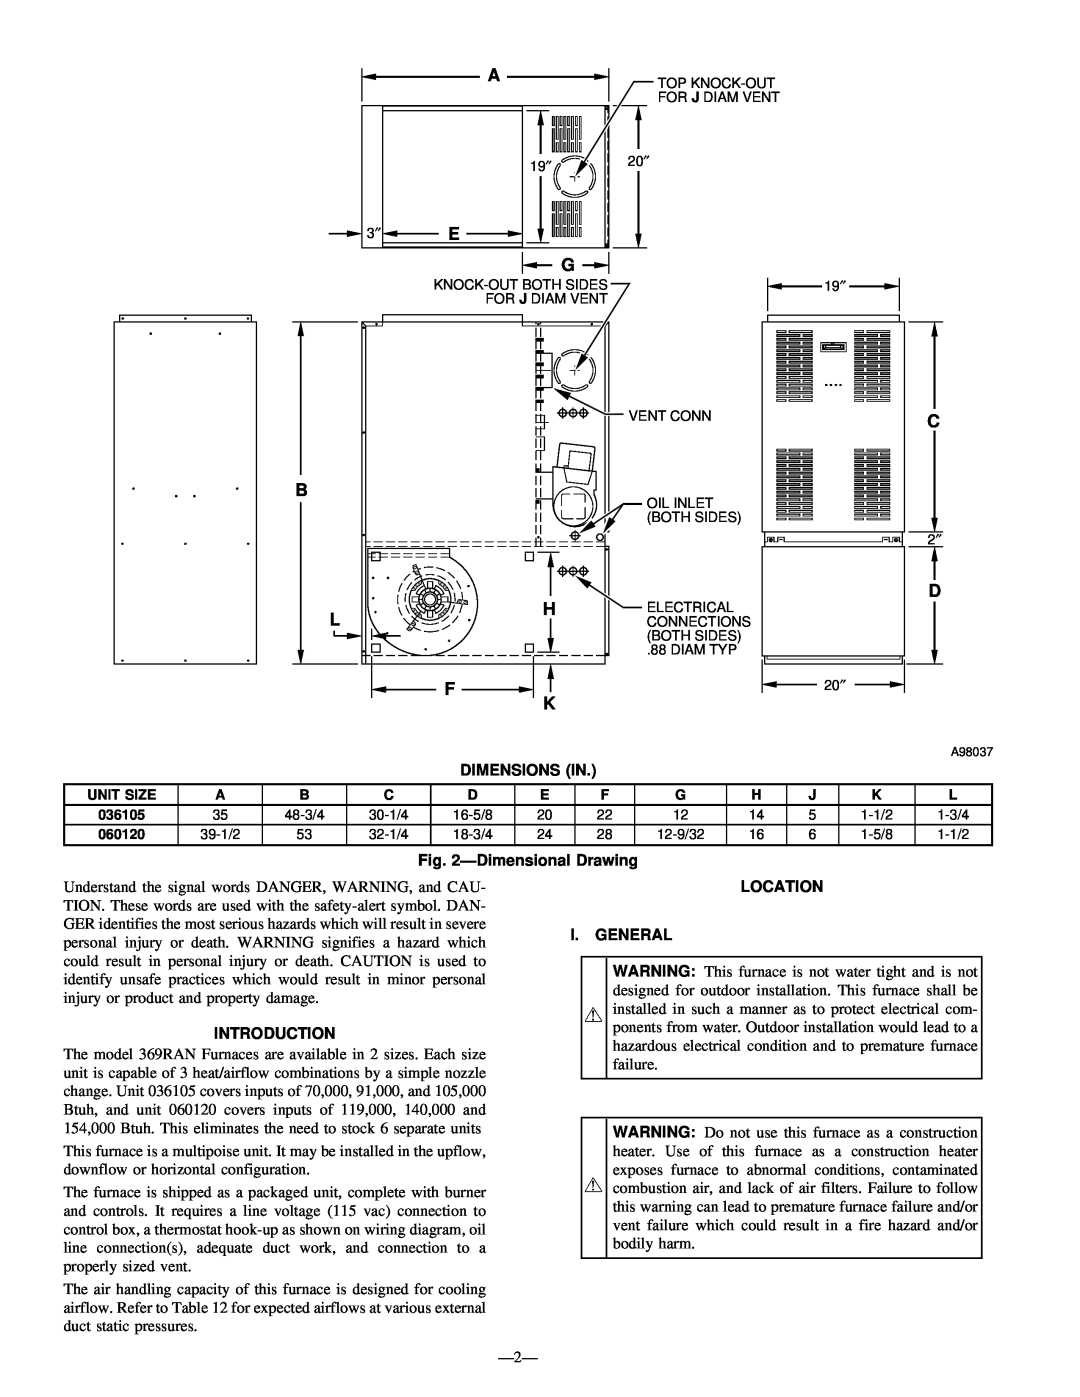 Bryant 369RAN instruction manual Dimensions In, DimensionalDrawing, Introduction, Location I. General 